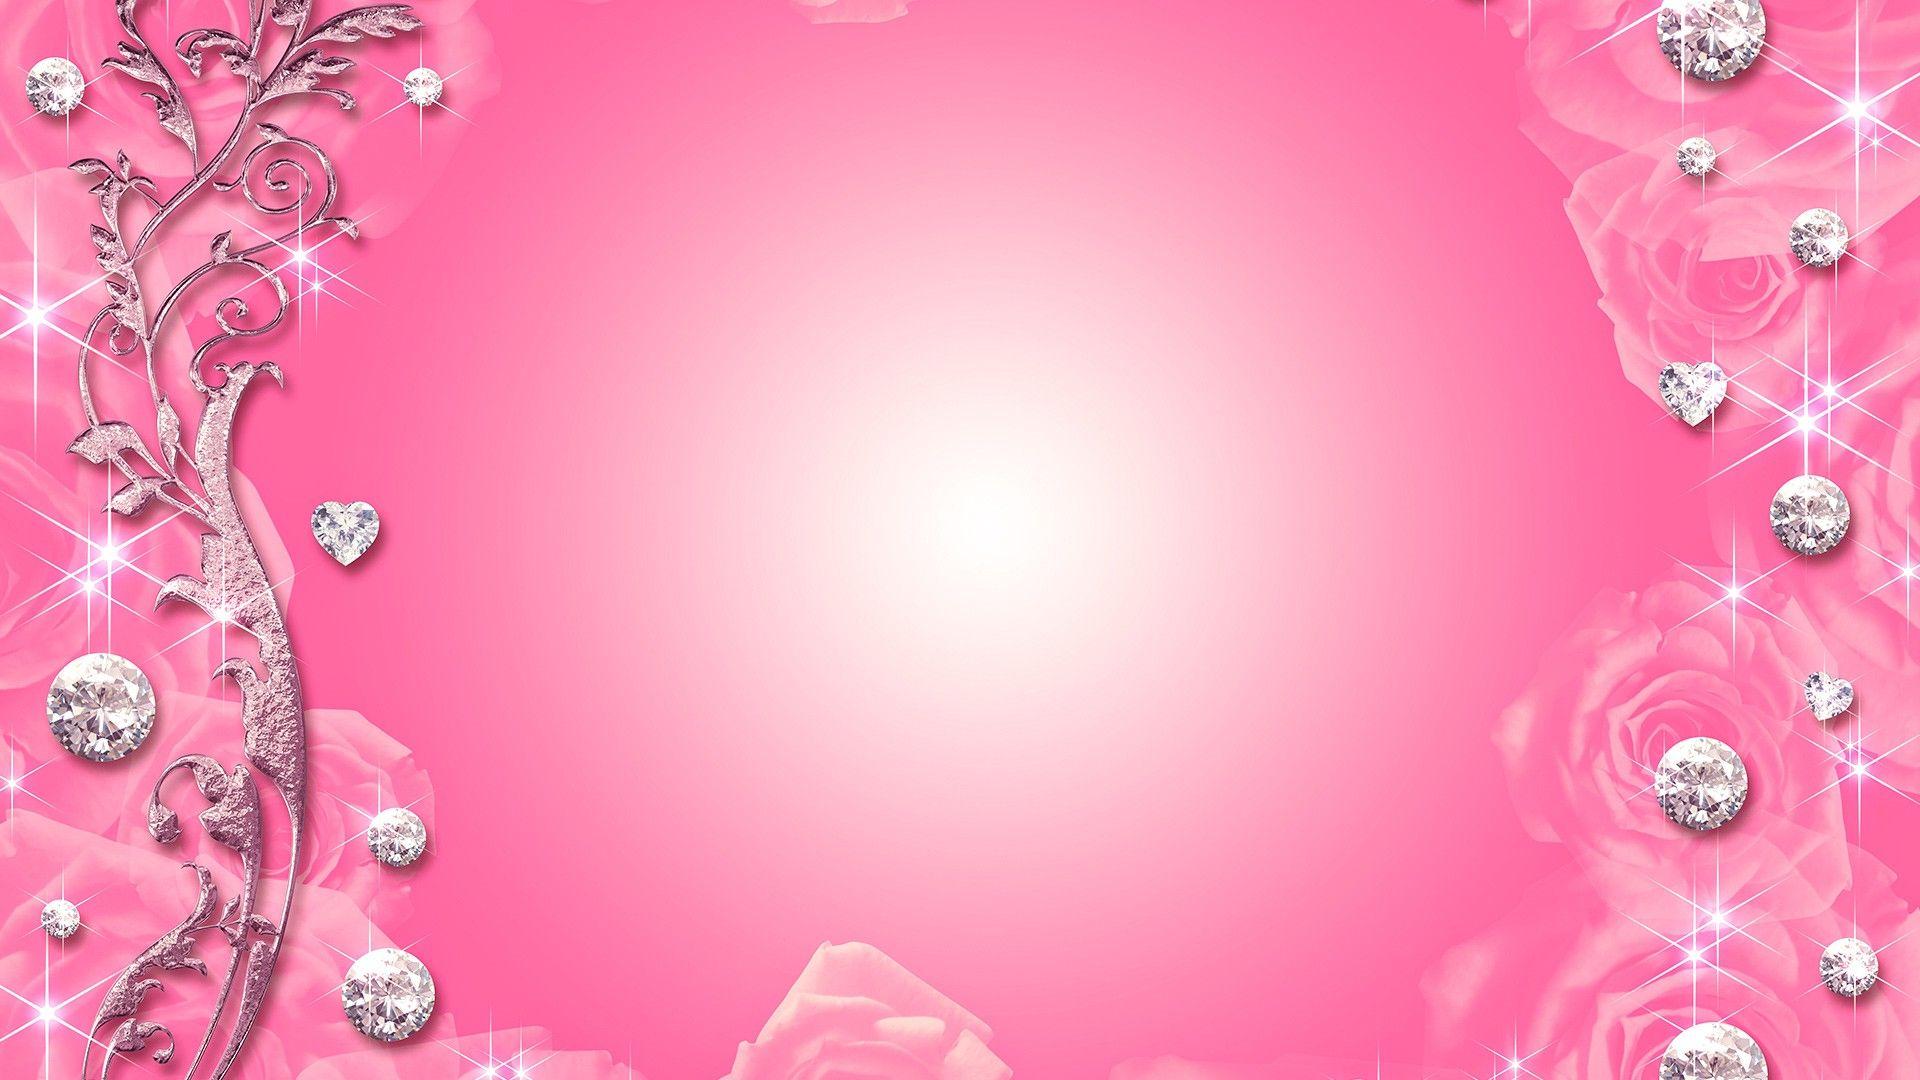 Pink Sparkle Glitter Wallpaper HD 12 Background. From UK to